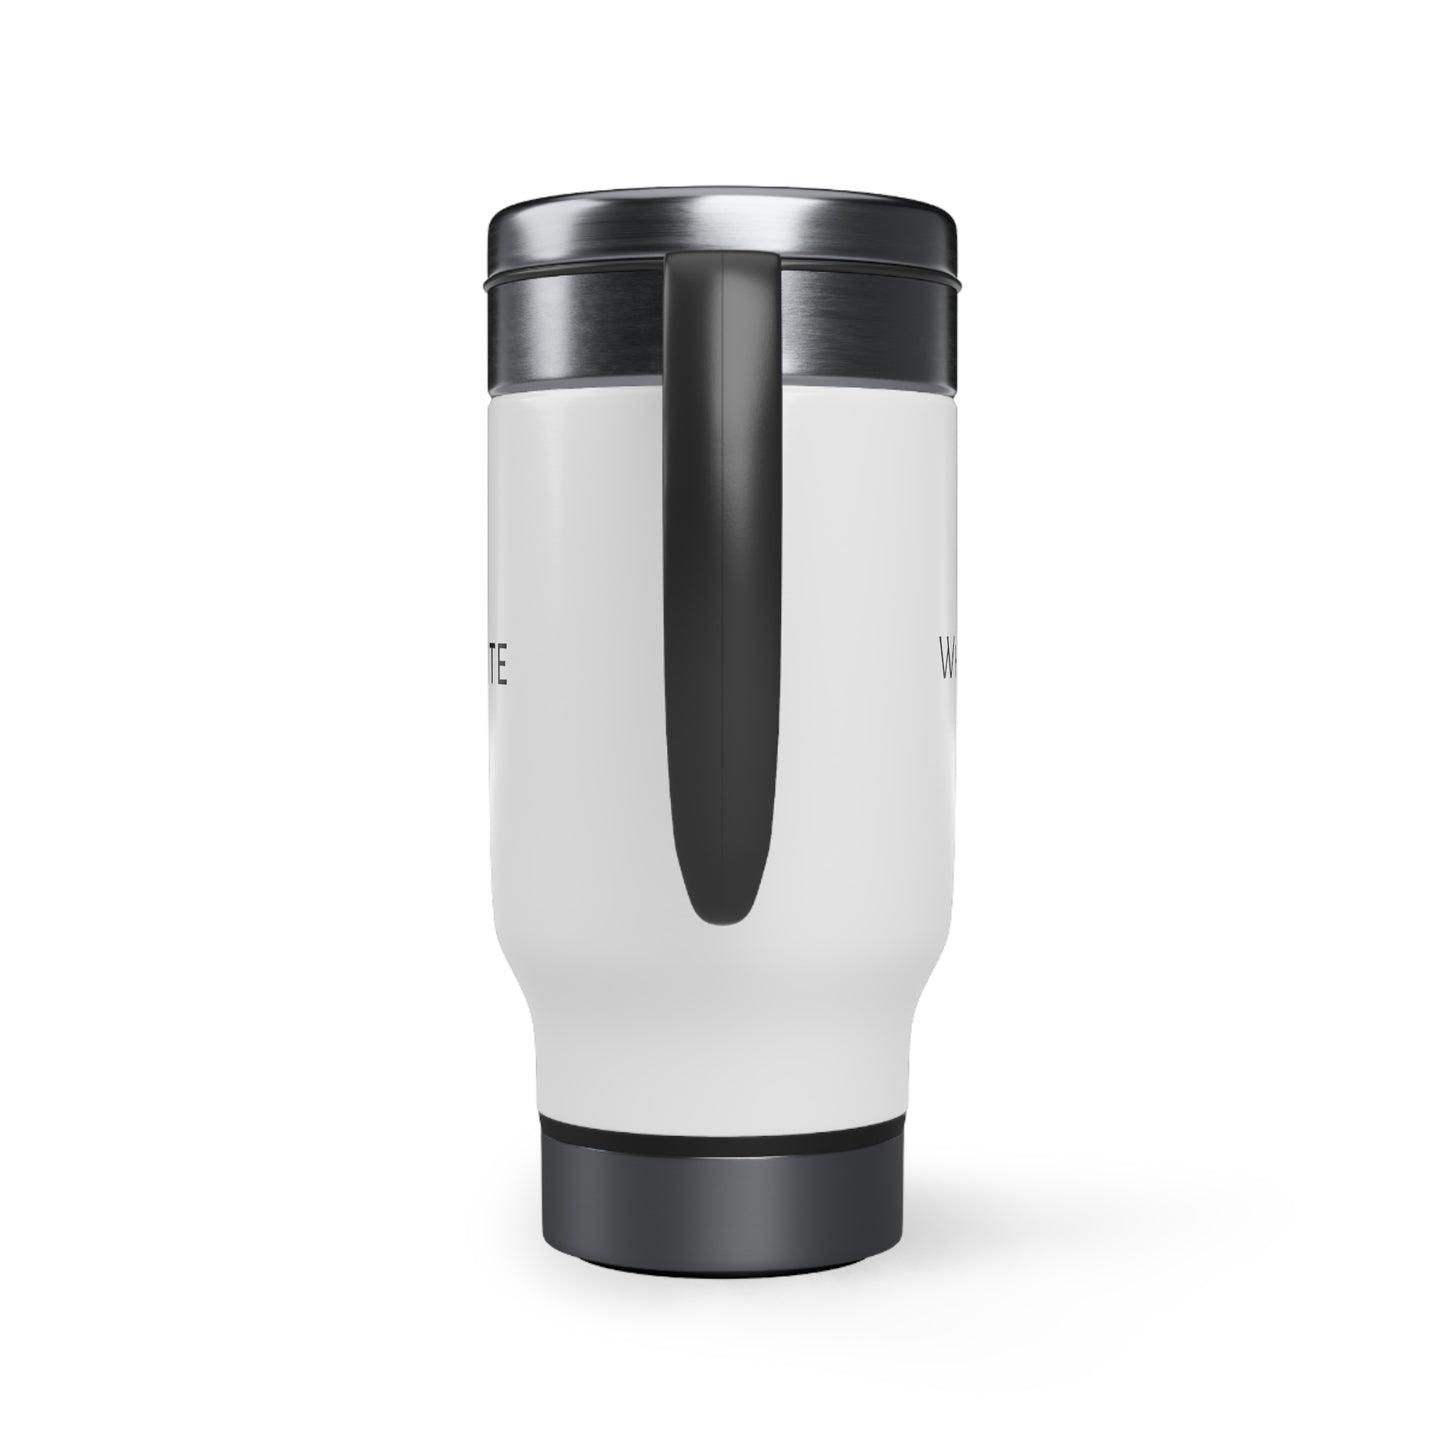 Who did it Stainless Steel Travel Mug with Handle, 14oz